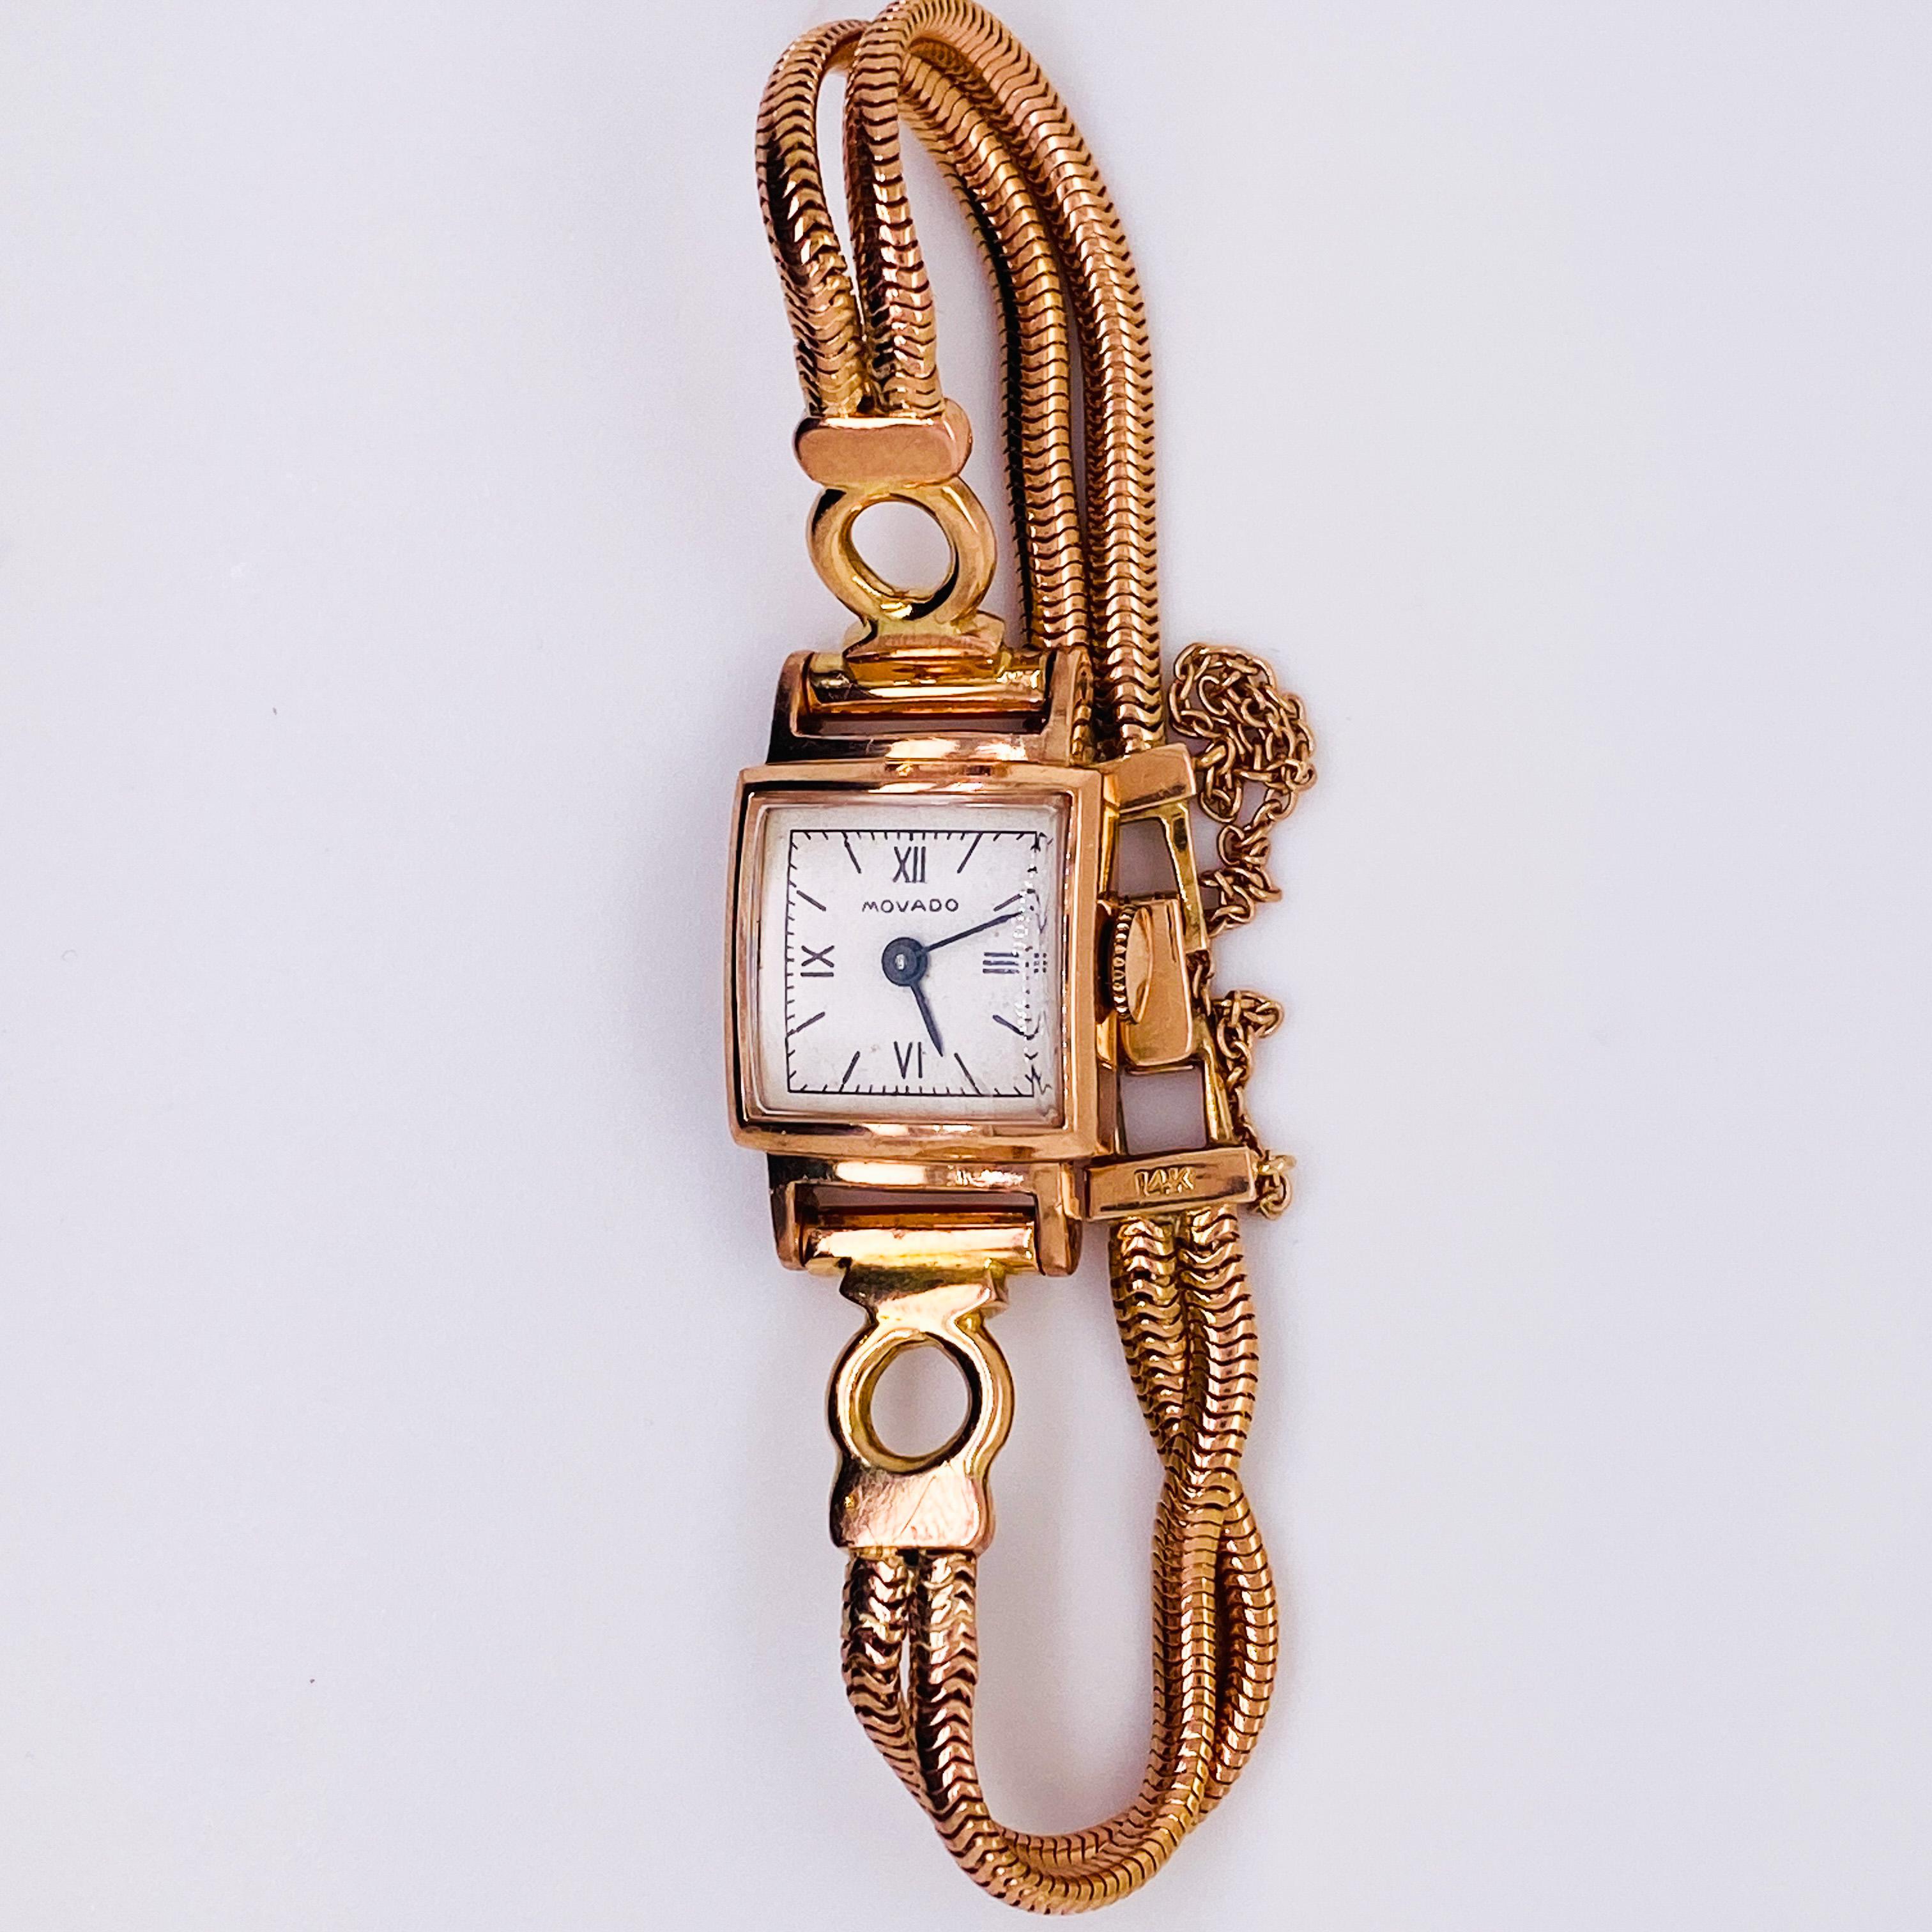 Movado has been making watches since 1881 and this vintage watch is Circa 1954. The solid 14 karat rose gold is gorgeous and very Retro. The band is fitted for a small wrist and includes a 14 karat rose gold safety chain. The square shape of the